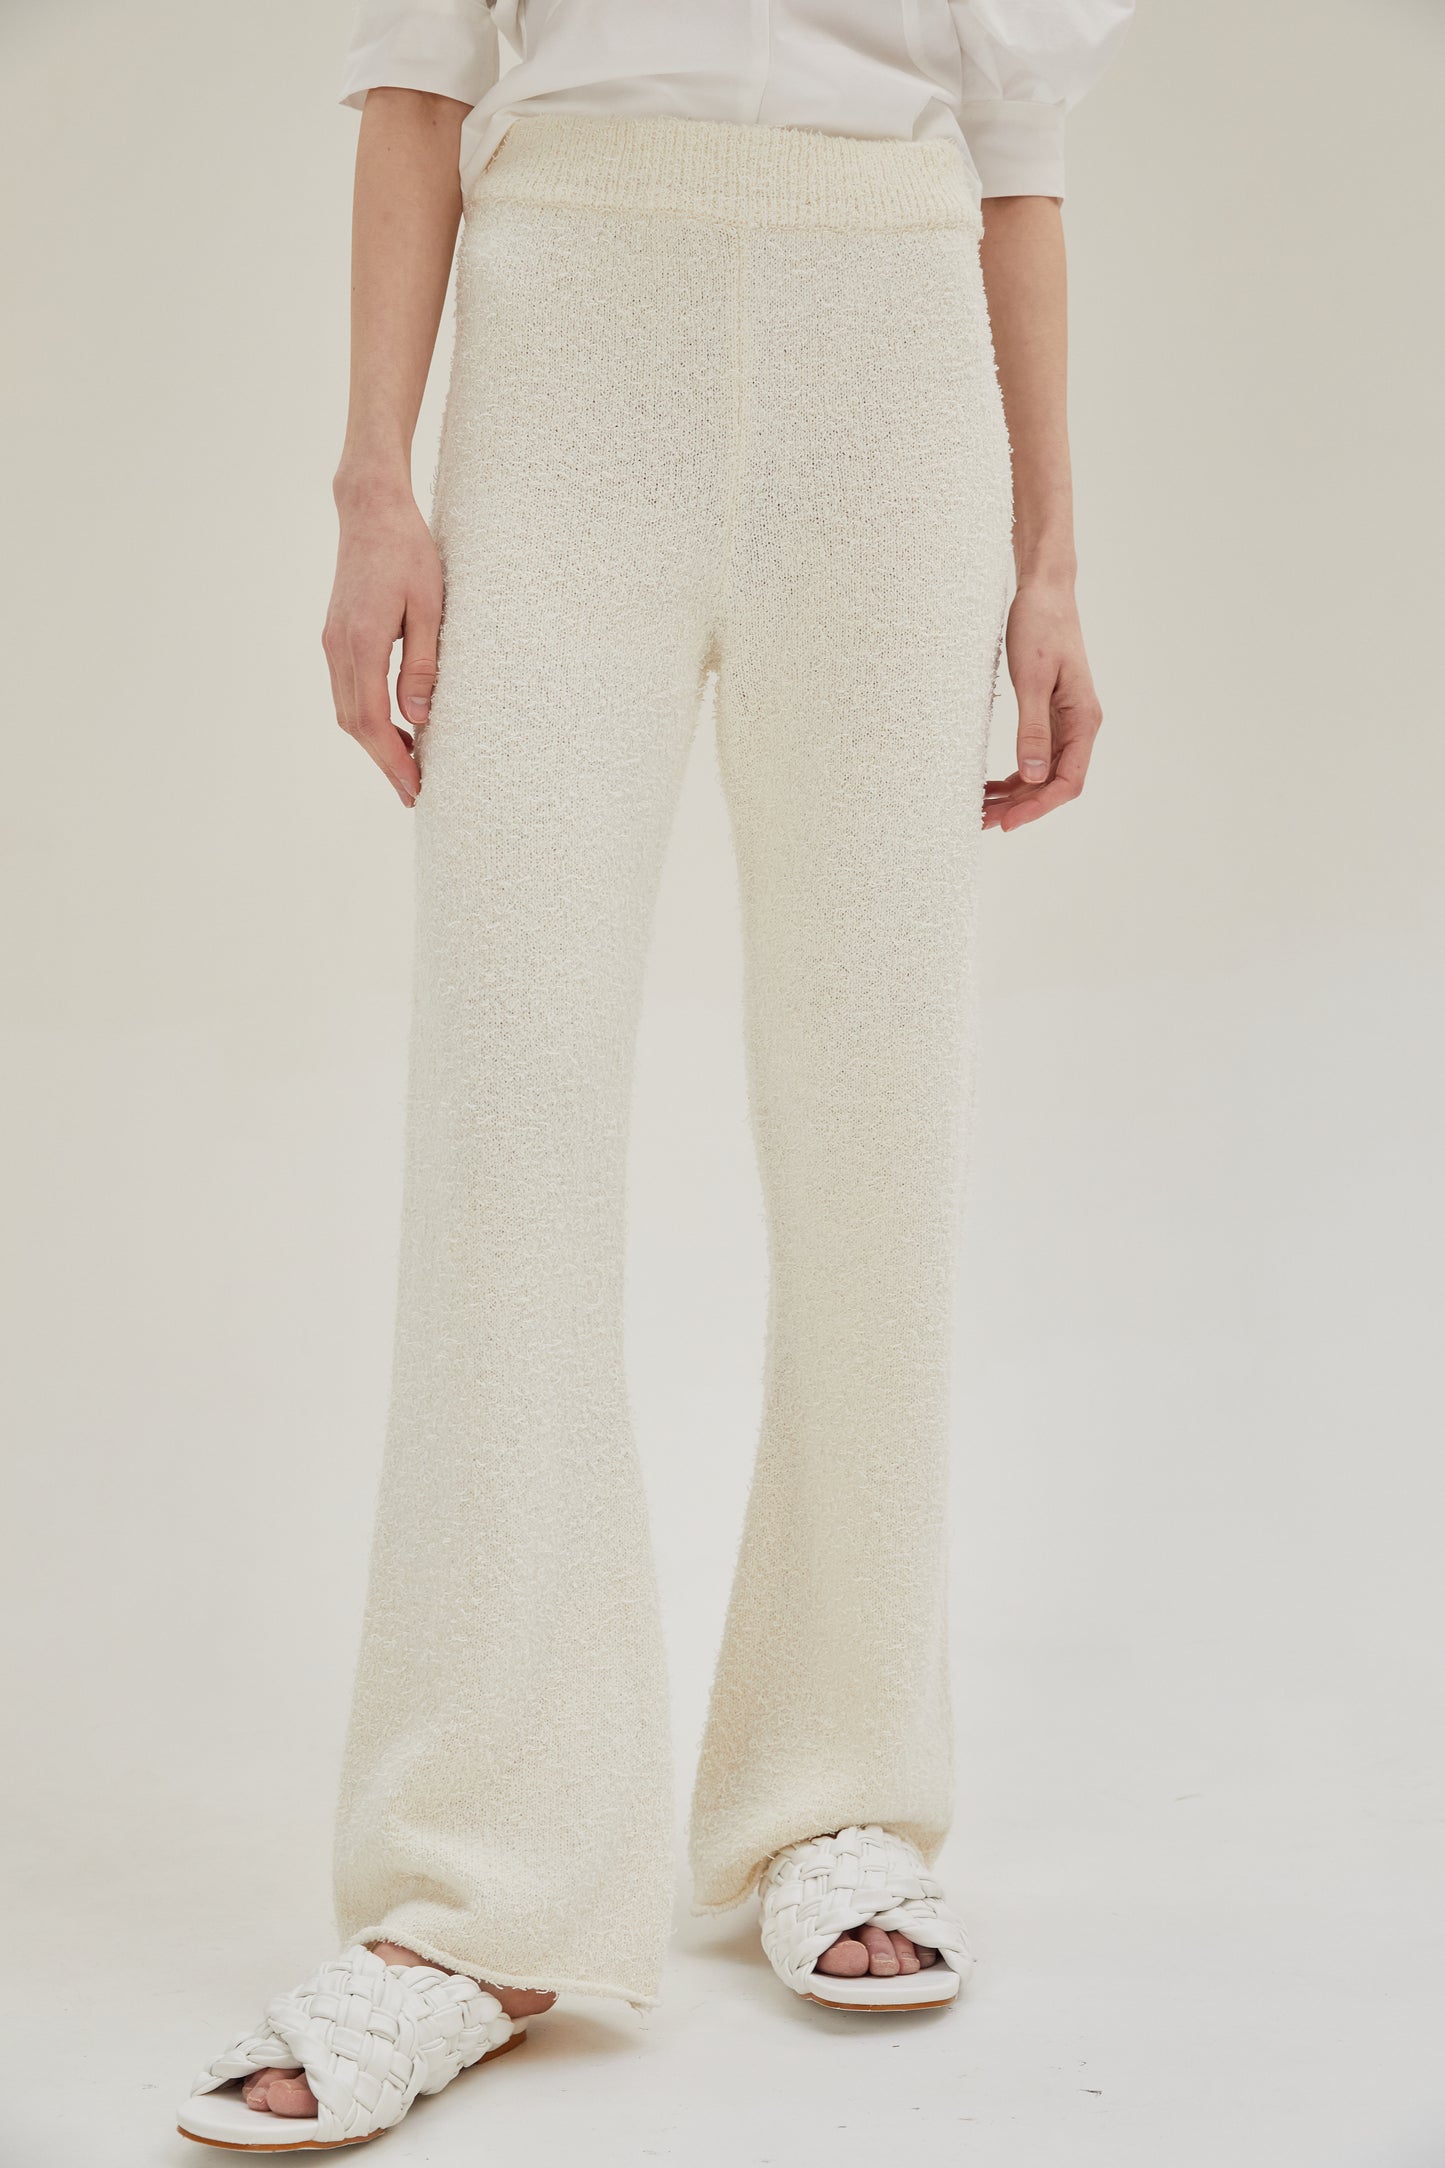 Pull-On Knit Pants, Creme